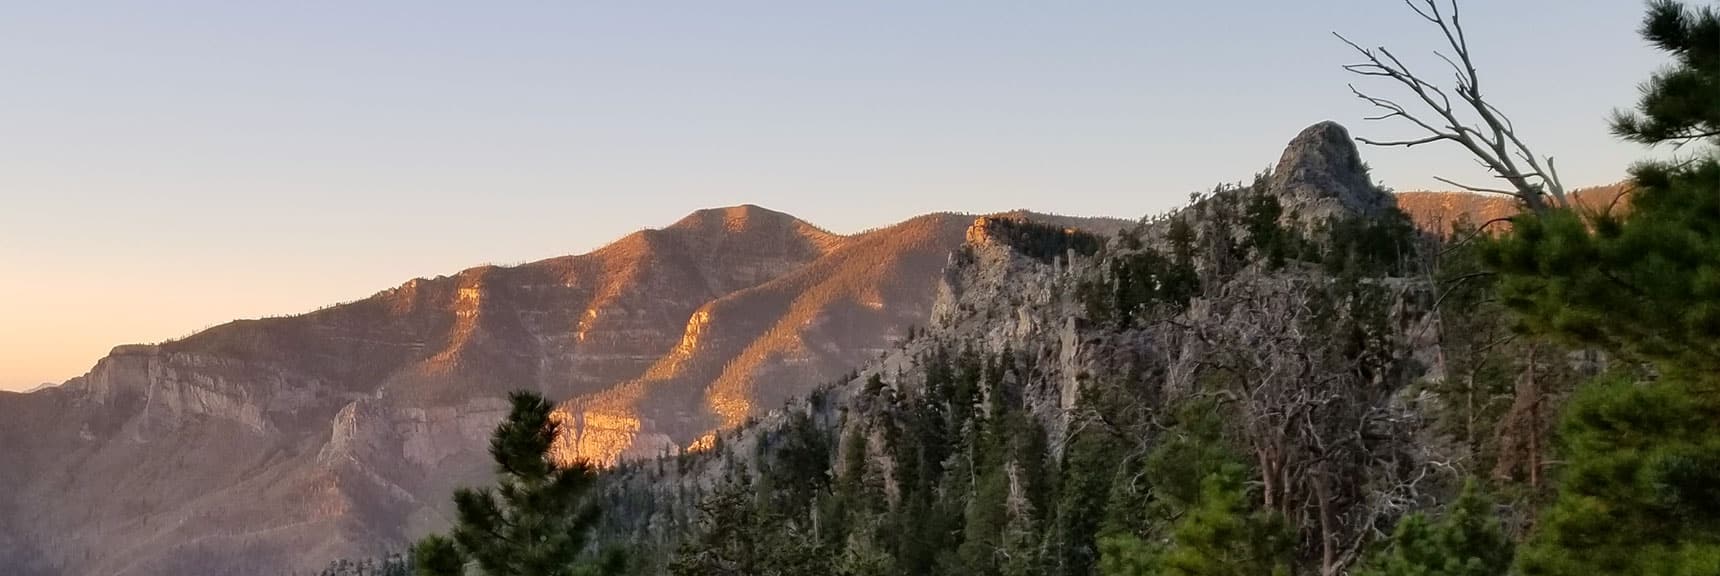 Cockscomb Peak and Ridge Viewed from North Loop Trail Just Beyond Trail Canyon Trail Junction in Mt Charleston Wilderness, Nevada